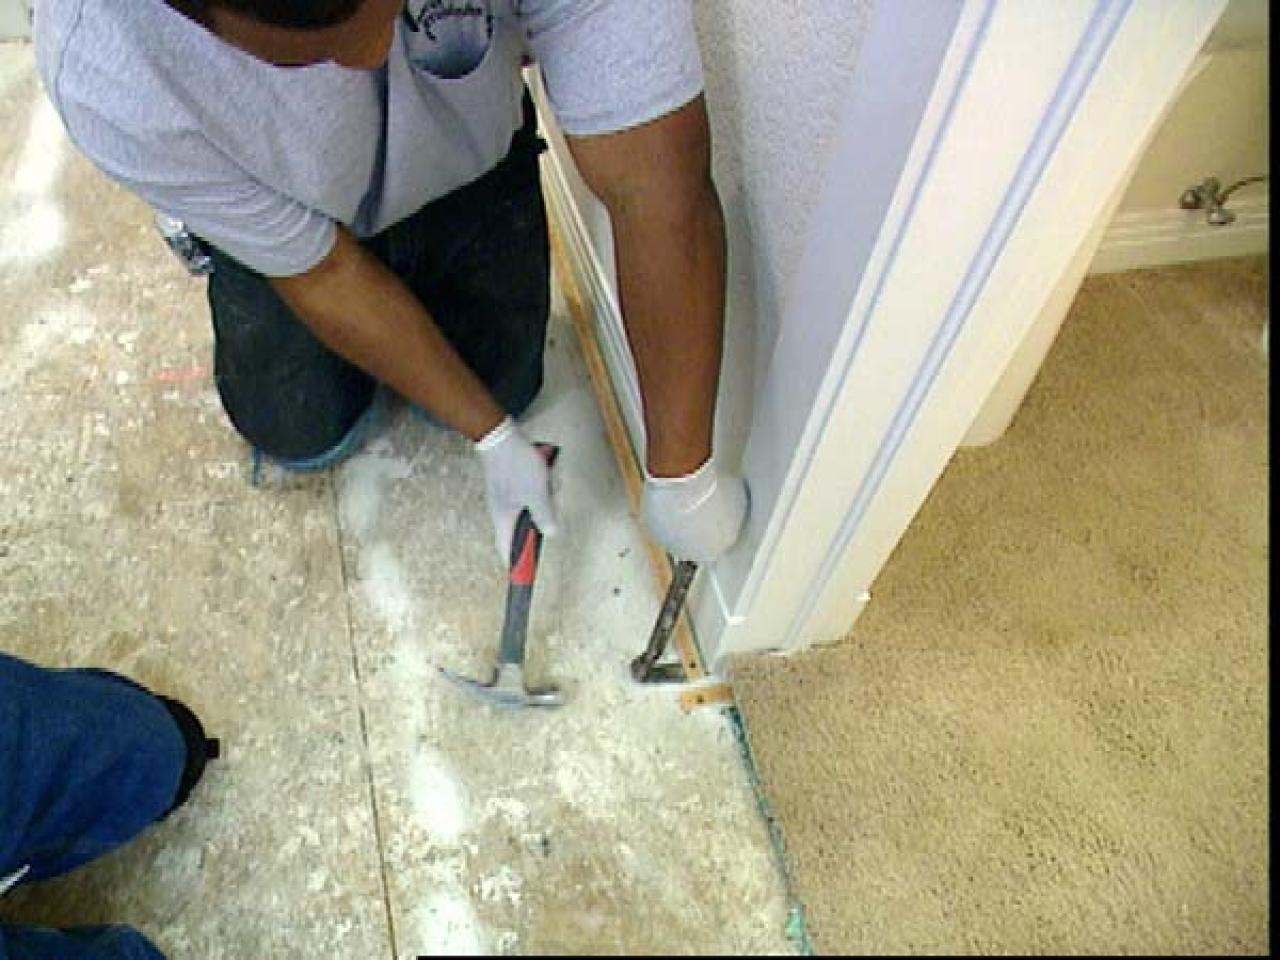 How To Install Tile Flooring Tos, How To Install Laminate Tile Flooring On Concrete